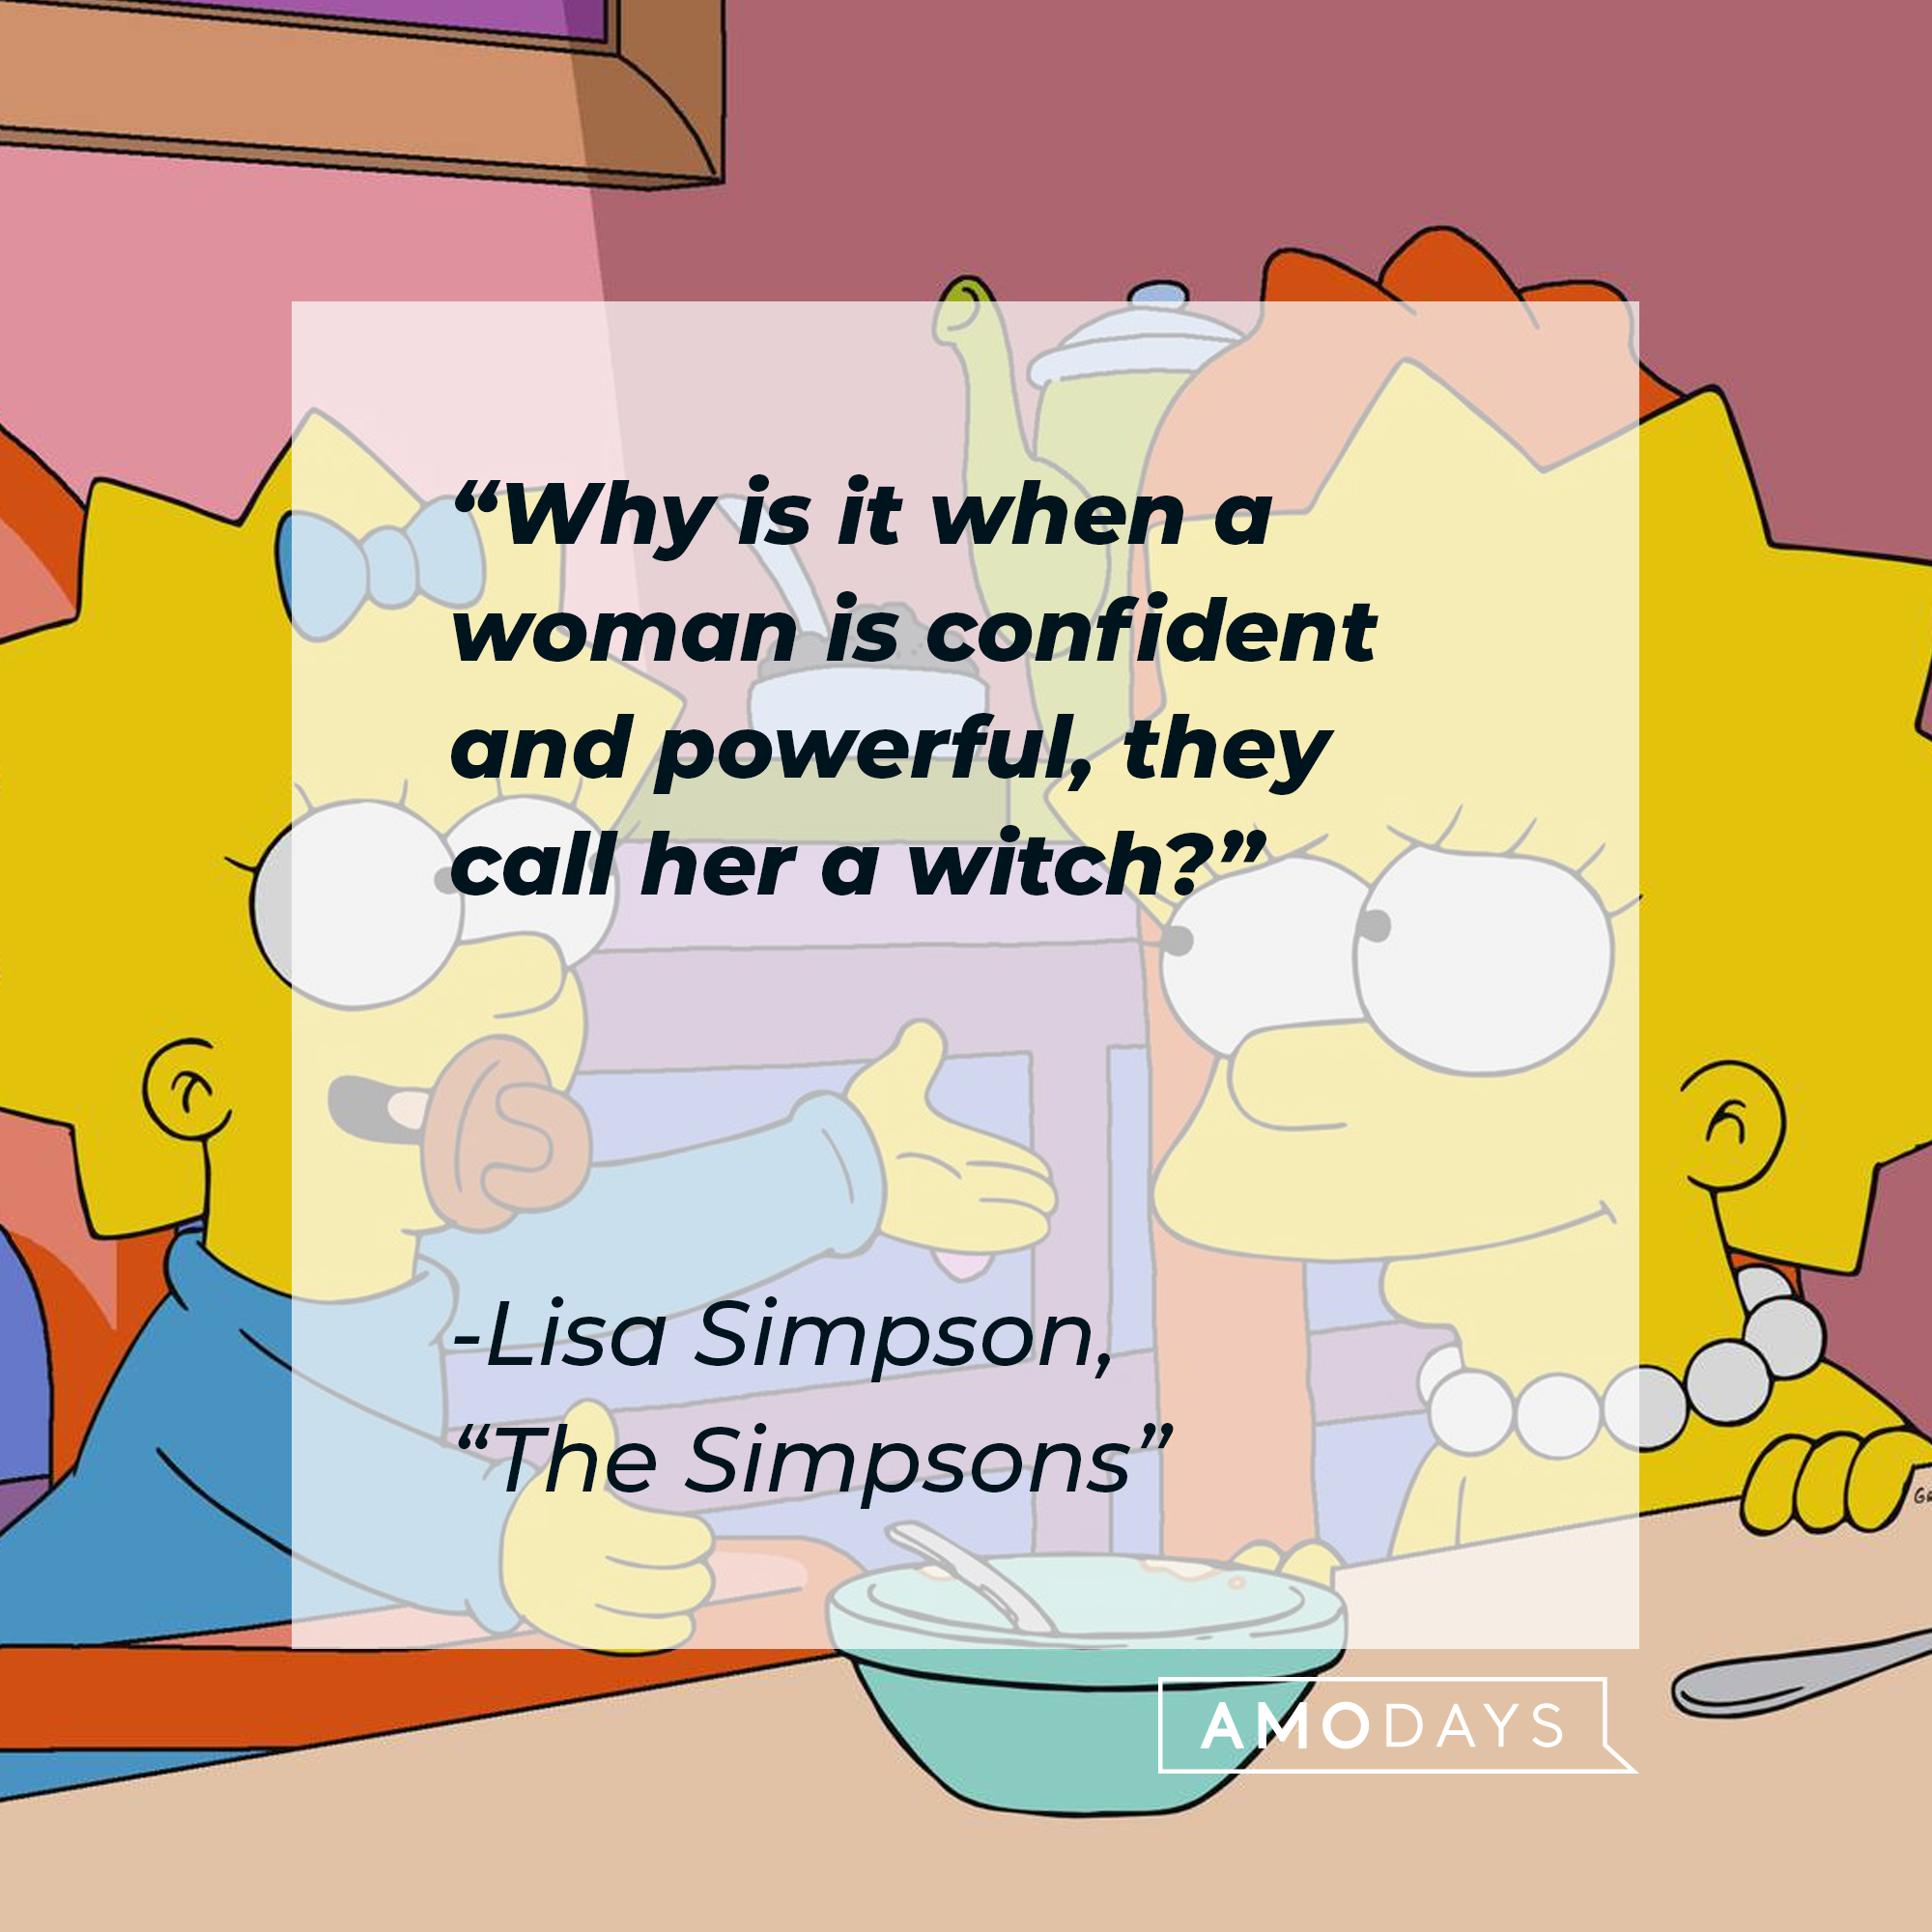 Lisa Simpson with her quote: "Why is it when a woman is confident and powerful, they call her a witch?" | Source: Facebook.com/TheSimpsons